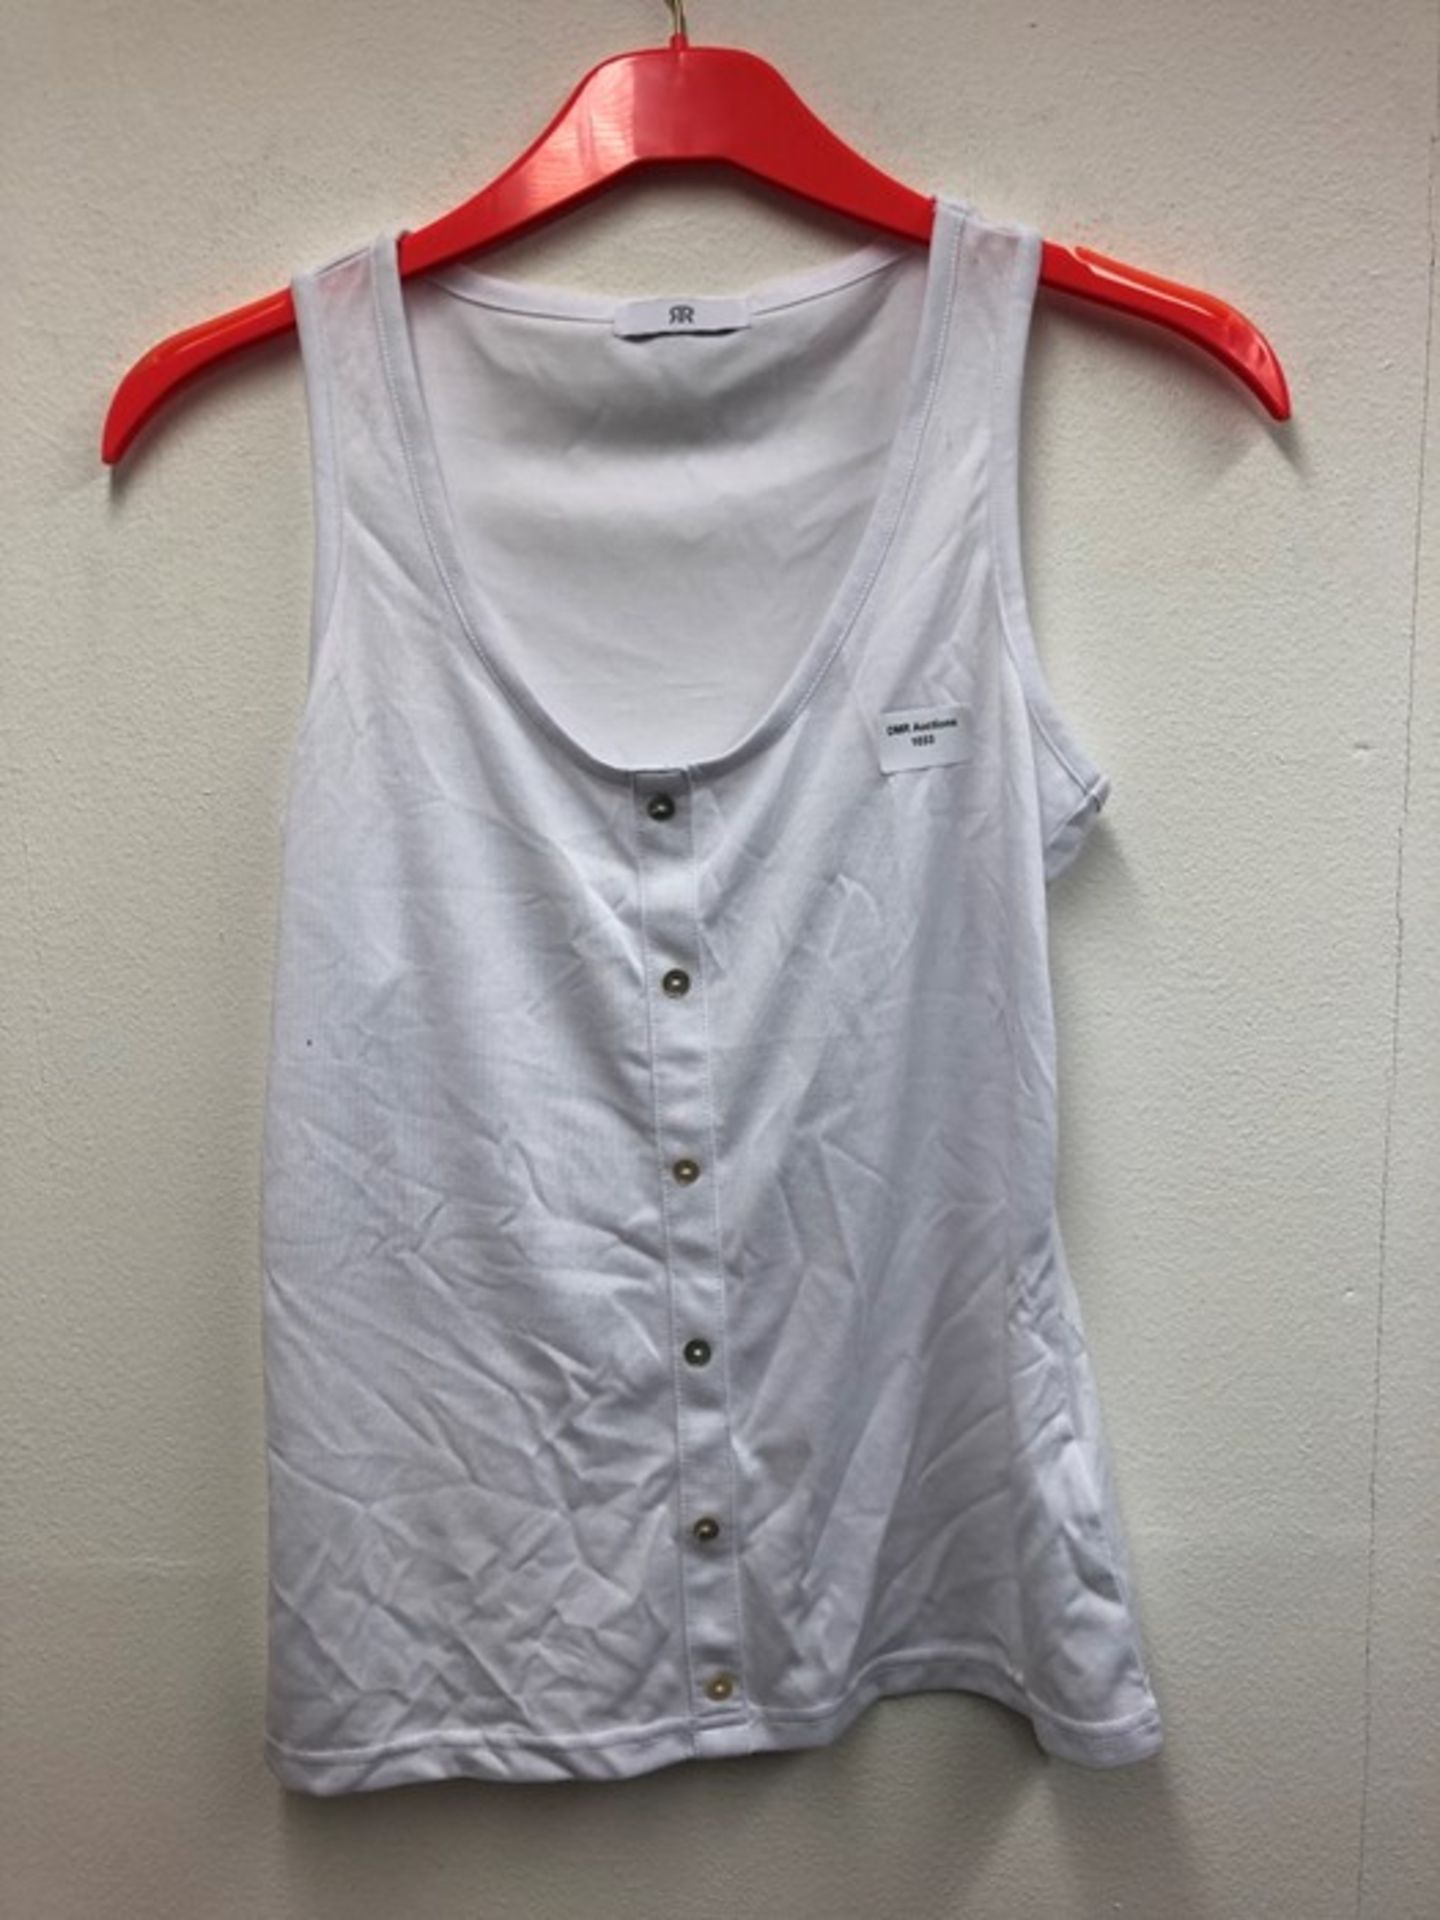 1 LA REDOUTE SLEEVLESS TOP IN WHITE / SIZE SMALL (